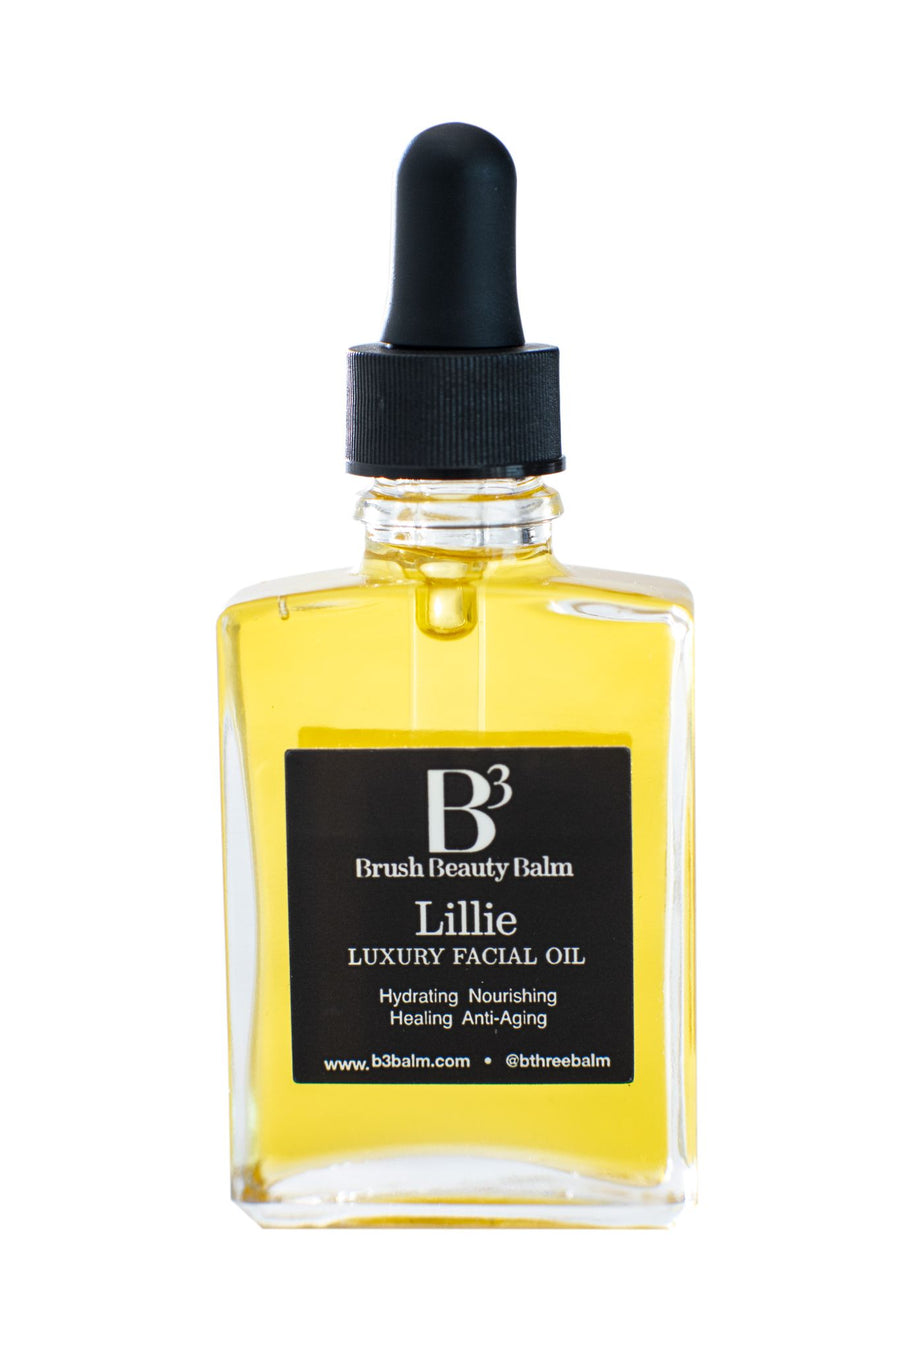 Bottle of the Lillie facial oil showing the clear glass bottle that has a clear glass dropper with rubber lid. Black and white label with product uses.